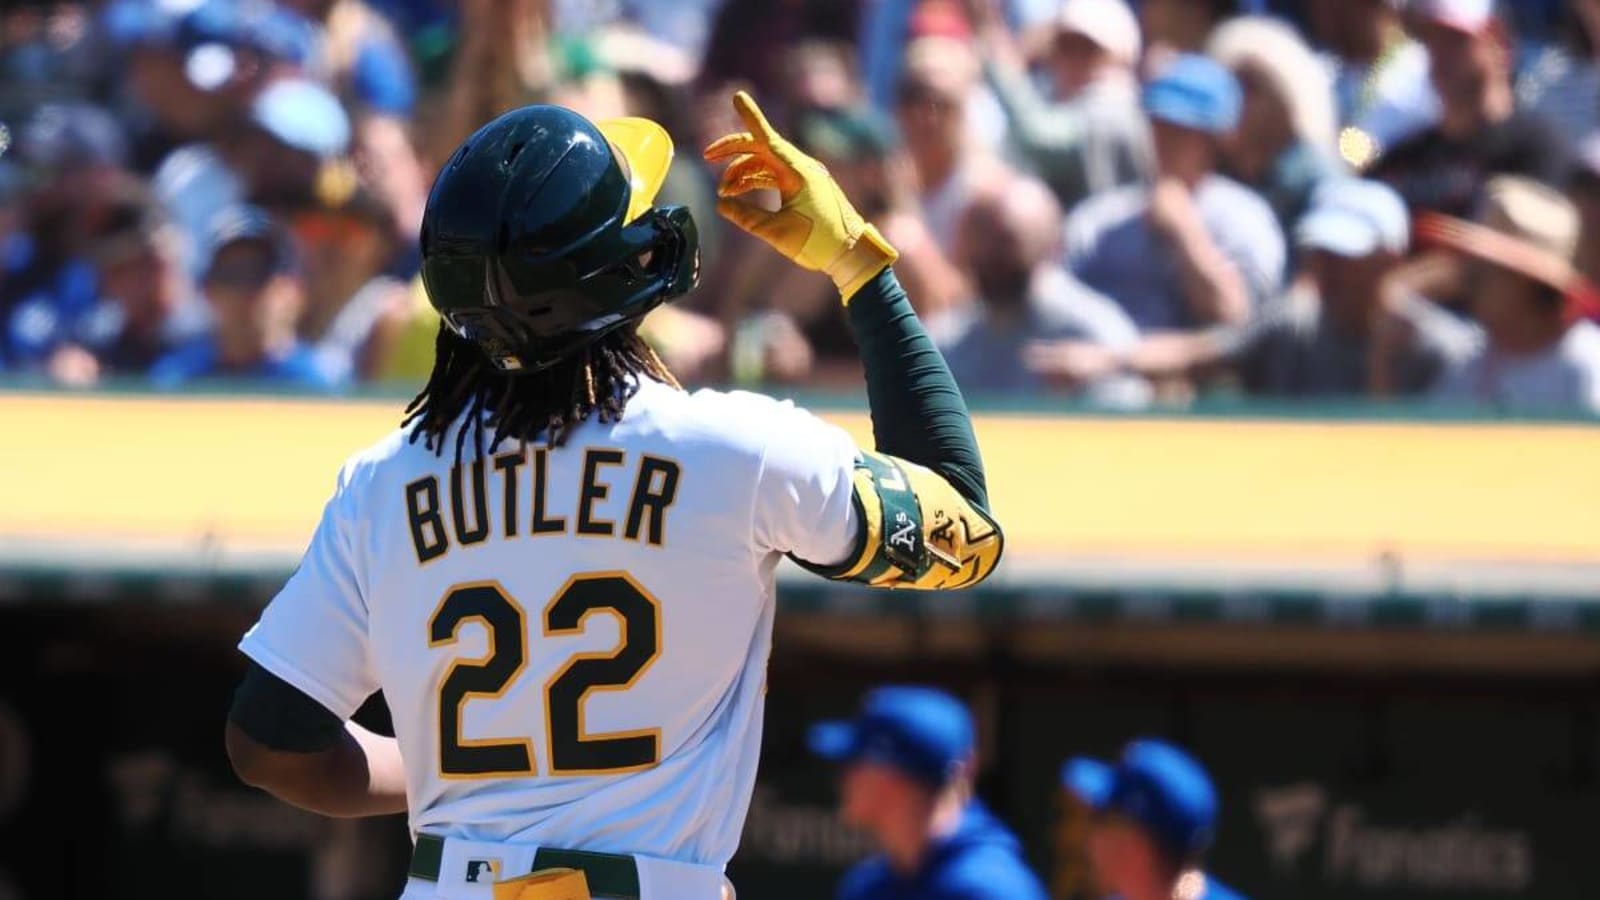 Lawrence Butler&#39;s Two Homer Day Latest Example of Bright Future